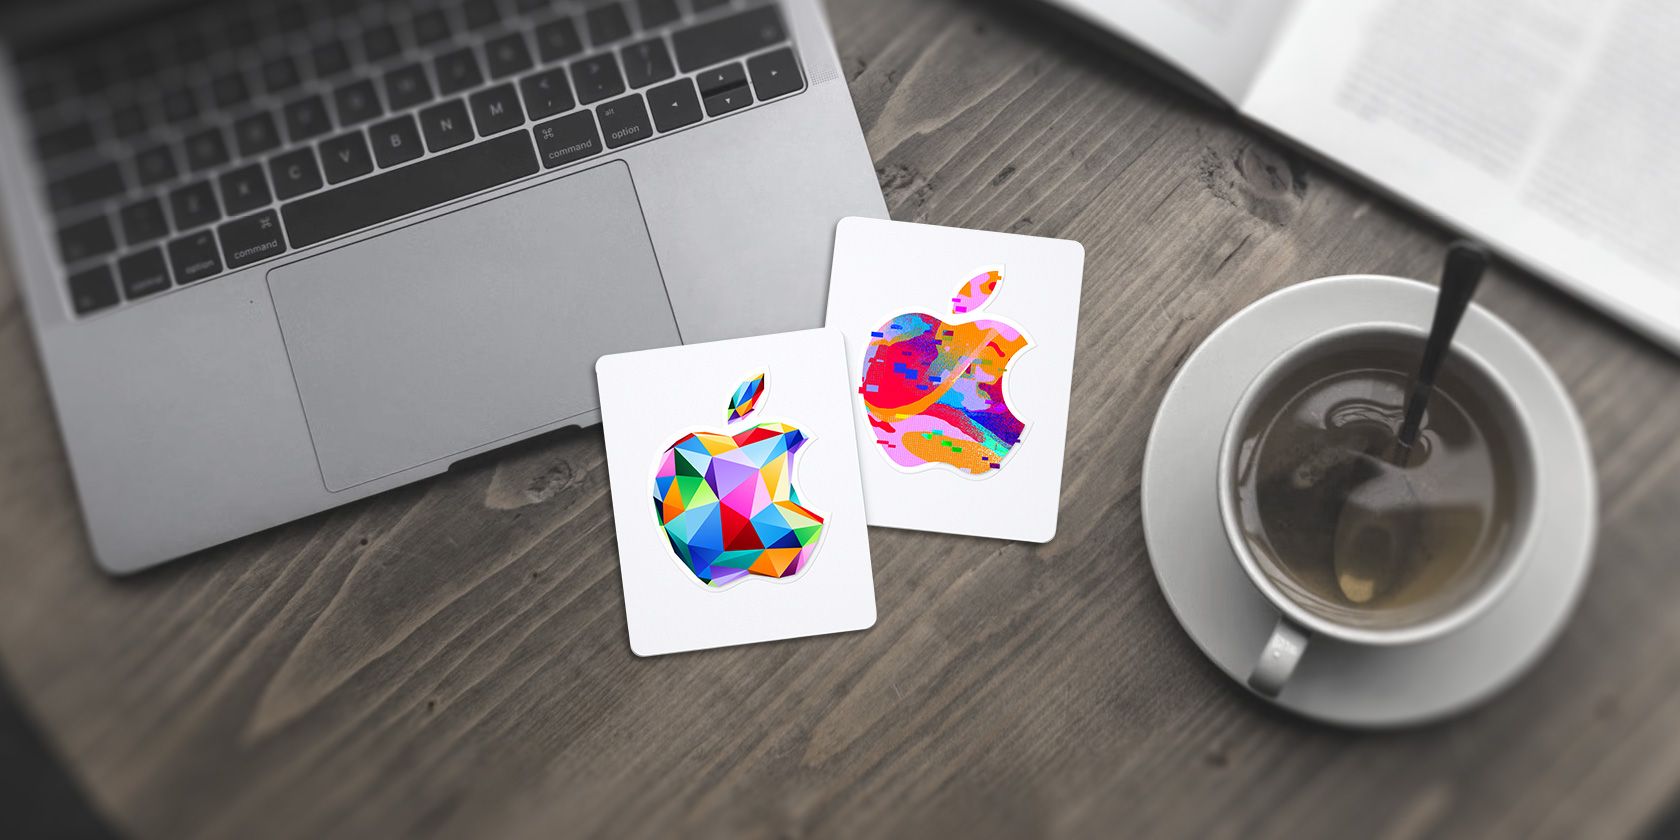 Apple Store Gift Cards Available In India Via Amazon, To, 54% OFF